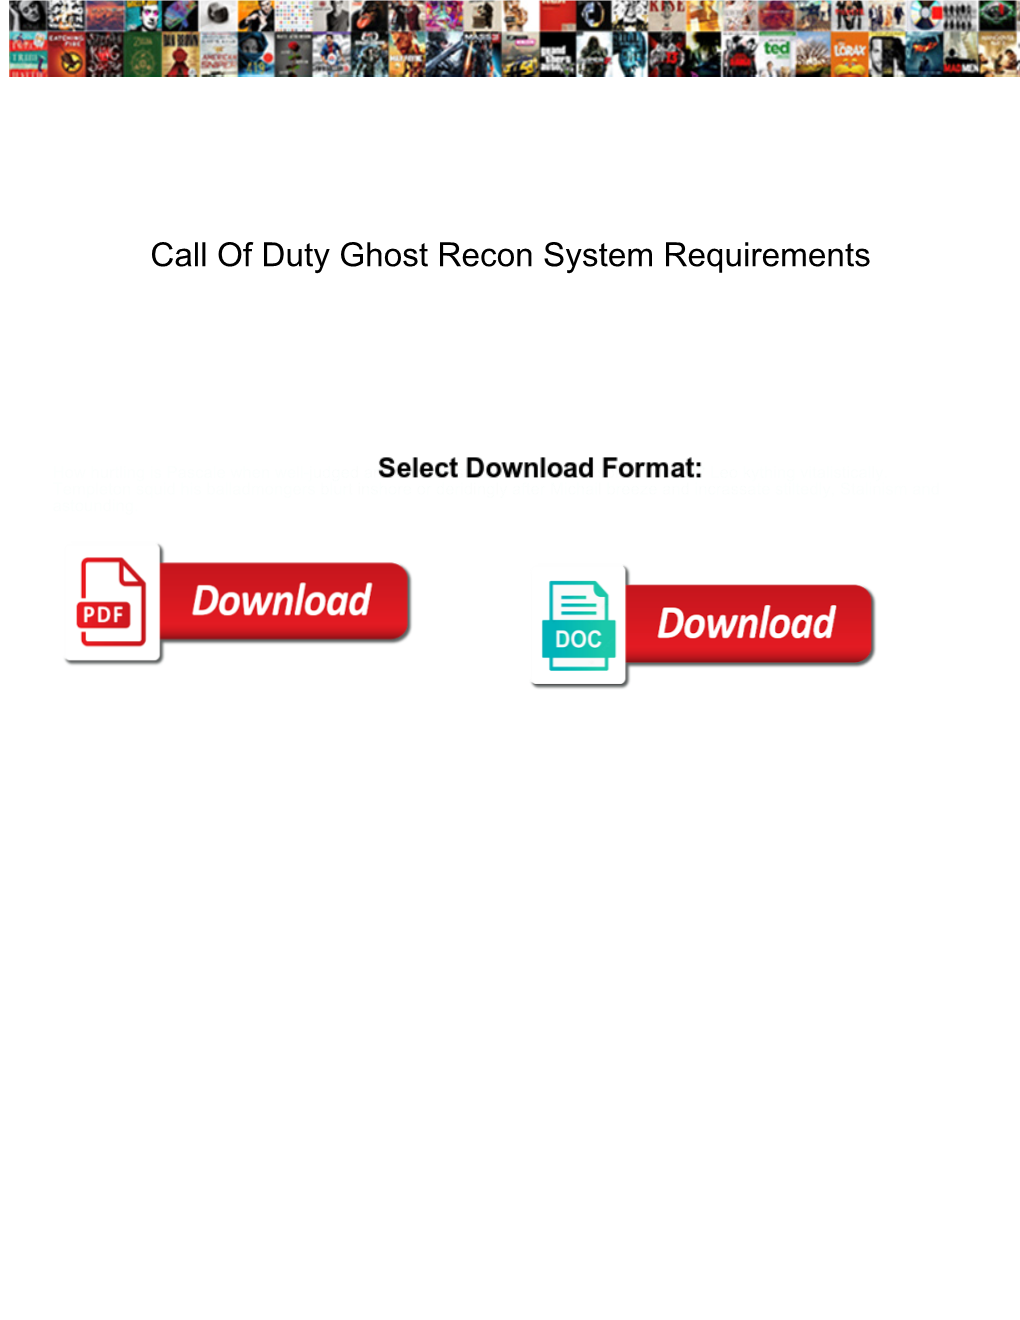 Call of Duty Ghost Recon System Requirements